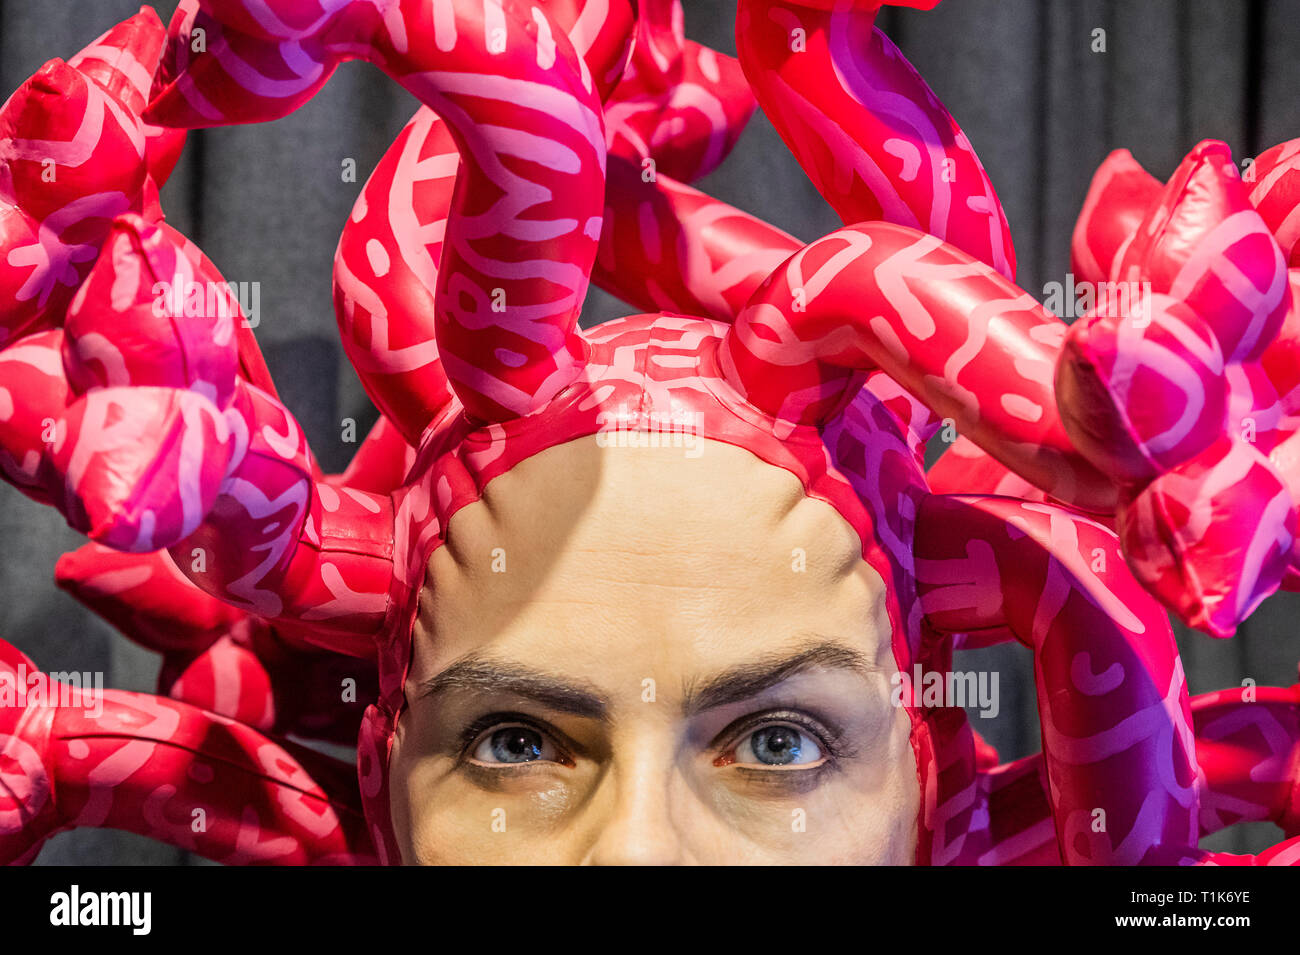 London, UK. 27th Mar, 2019. 'Olympe' by AspenCrow, a sculptural interpretation of medusa at the JD Malat Gallery - embodying the image and essence of Cara Delevigne and Olympe de Gouge.It symbolises the past, present and future of feminism which constantly evolves in the fight for gender equality. Created by AspenCrow, Edgar Askelovic, a self taught Lithuanian artist into hyperrealistic interpretive sculpture blending a mix of disciplines and techniques. 'Olympe' is made of Silicon UV resistant, resin and Acrylic Credit: Guy Bell/Alamy Live News Stock Photo